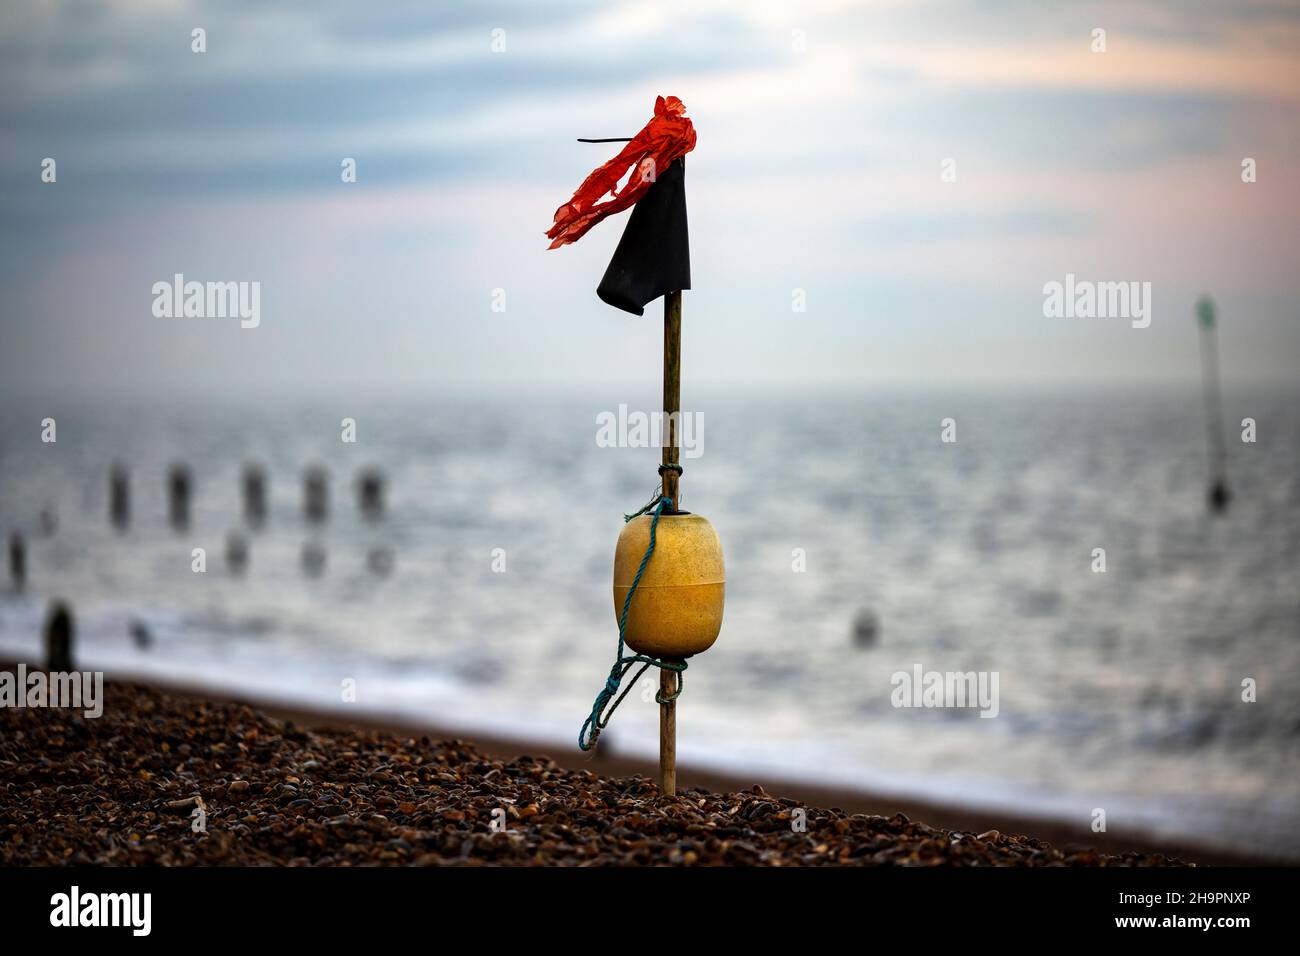 Lobster pot marker post washed up on the beach, Bawdsey Ferry, Suffolk, England. Stock Photo